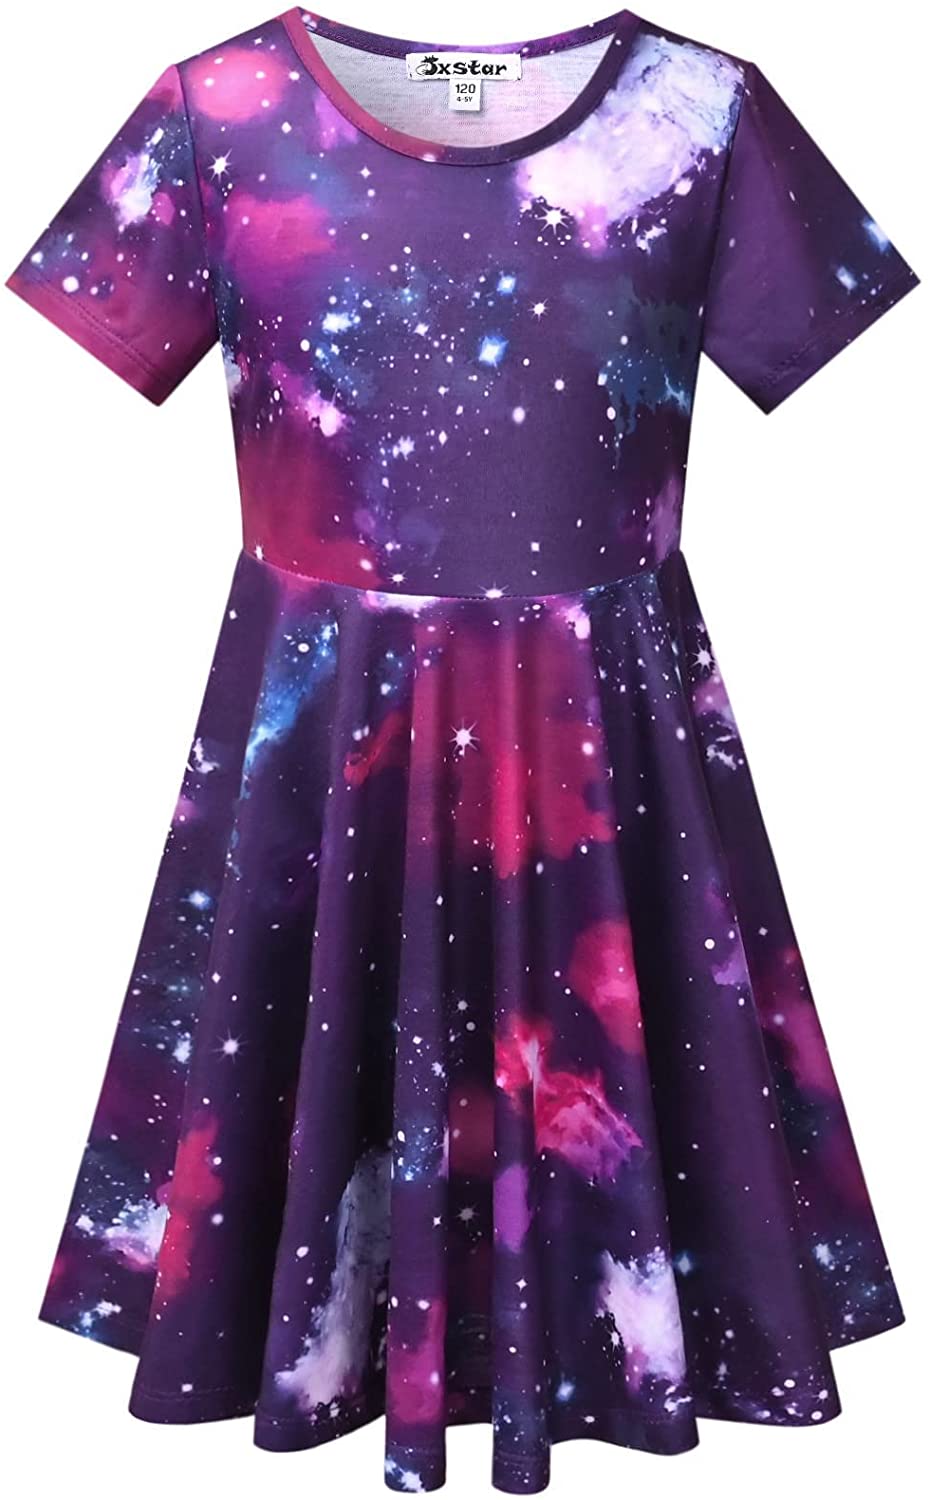 Girls Unicorn Dresses Summer Swing Short Sleeve Casual Clothes for